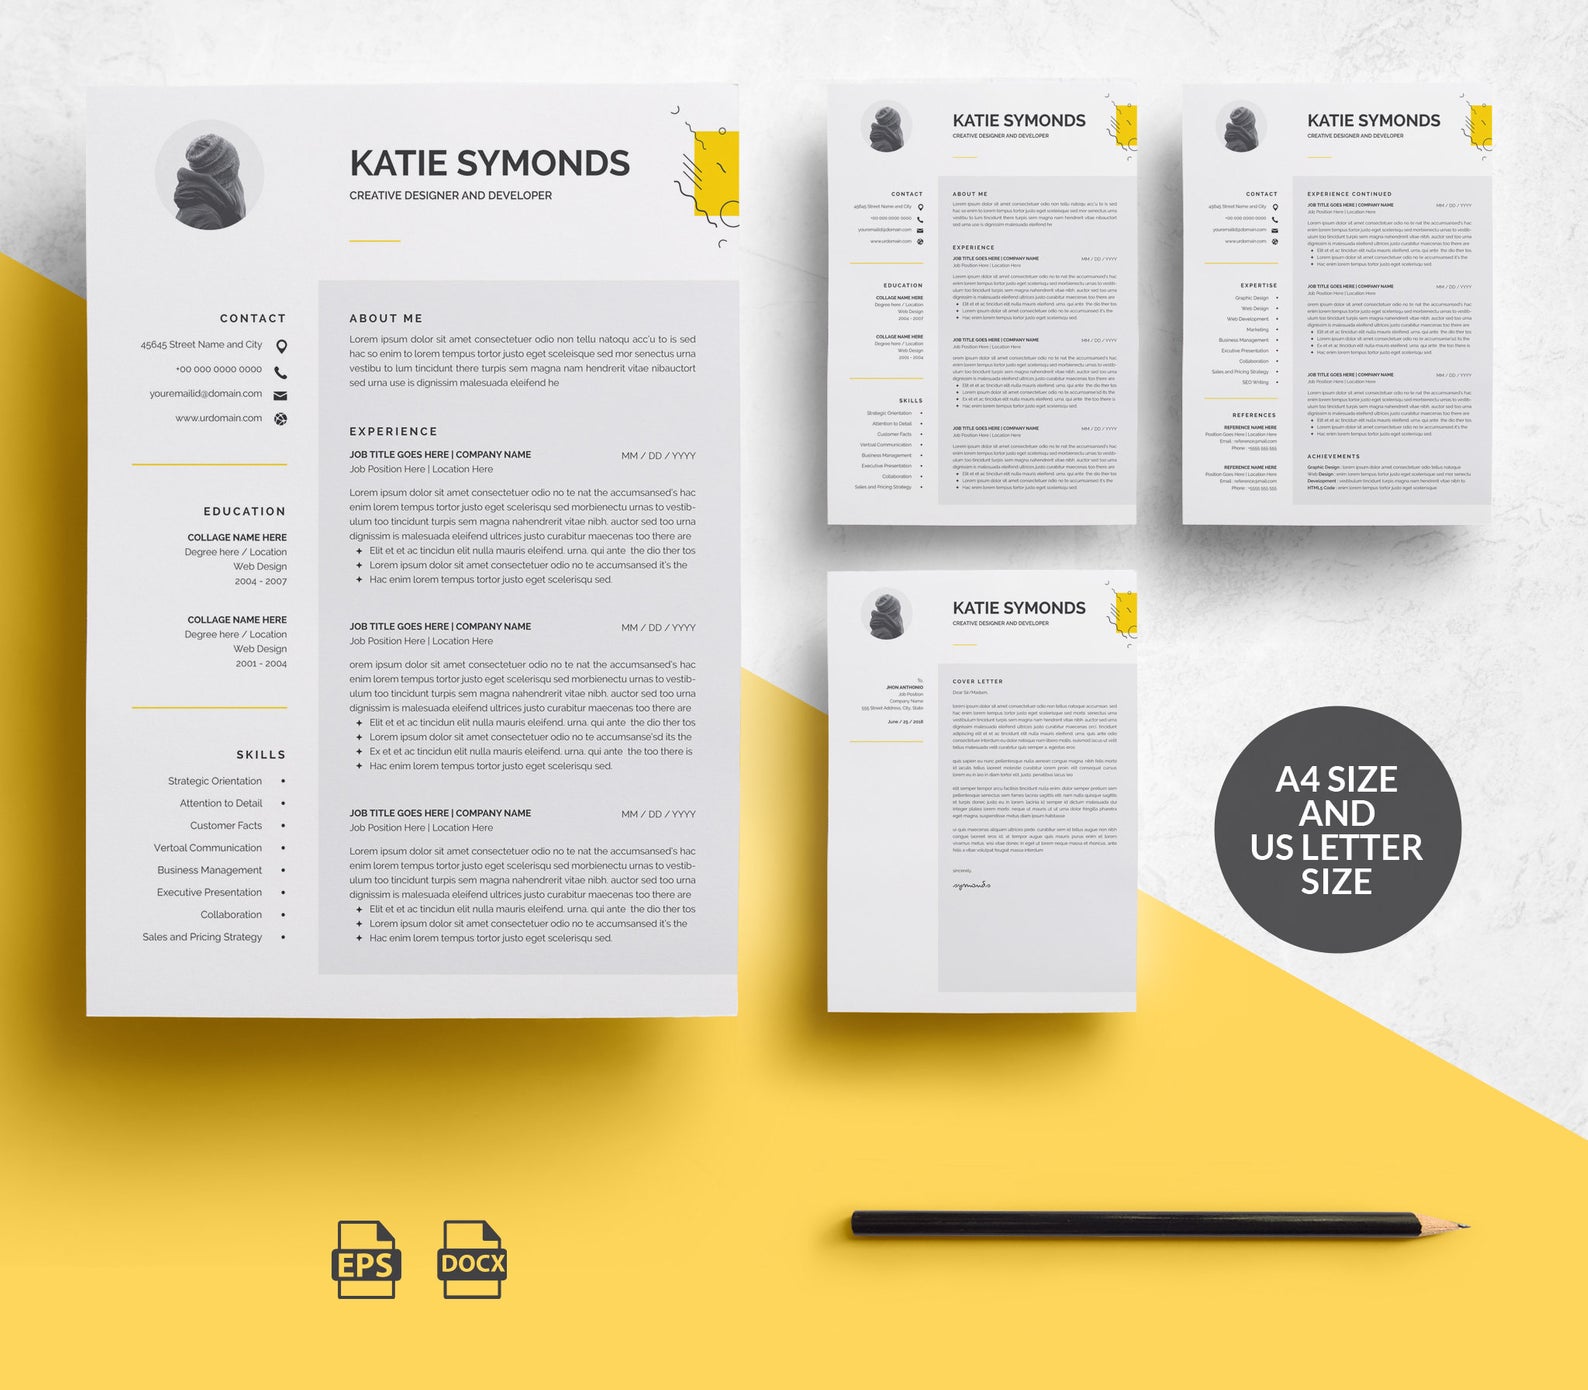 Template For Resume Resume Template For Marketers template for resume|wikiresume.com